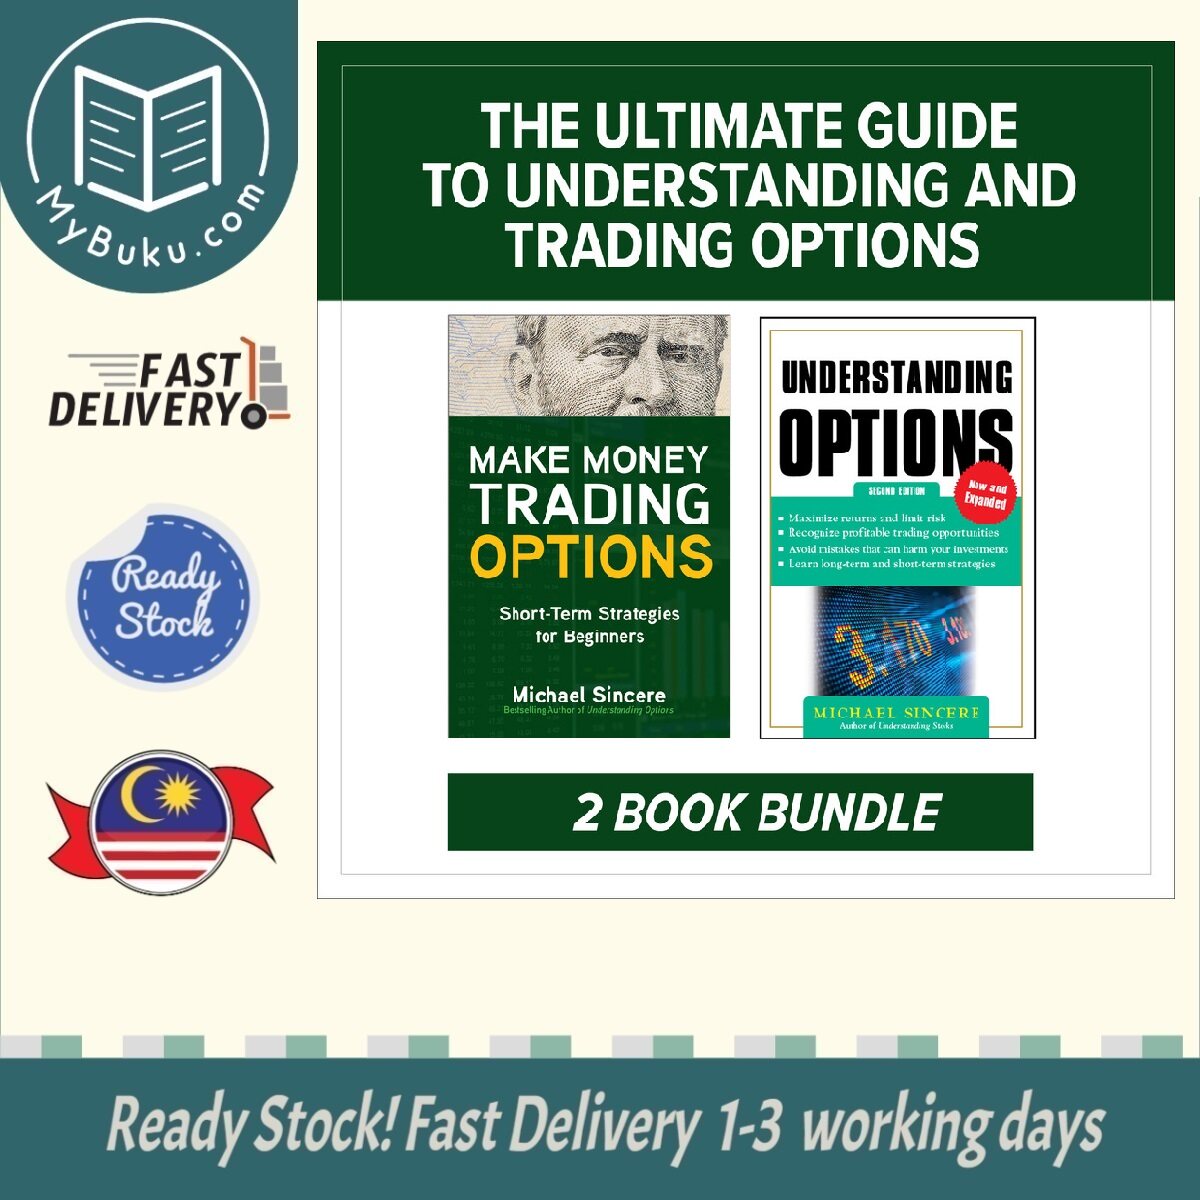 Ultimate Gd To Understanding & Trading Options: Two-Bk Bndl - Sincere - 9781260474640 - McGraw Hill Education